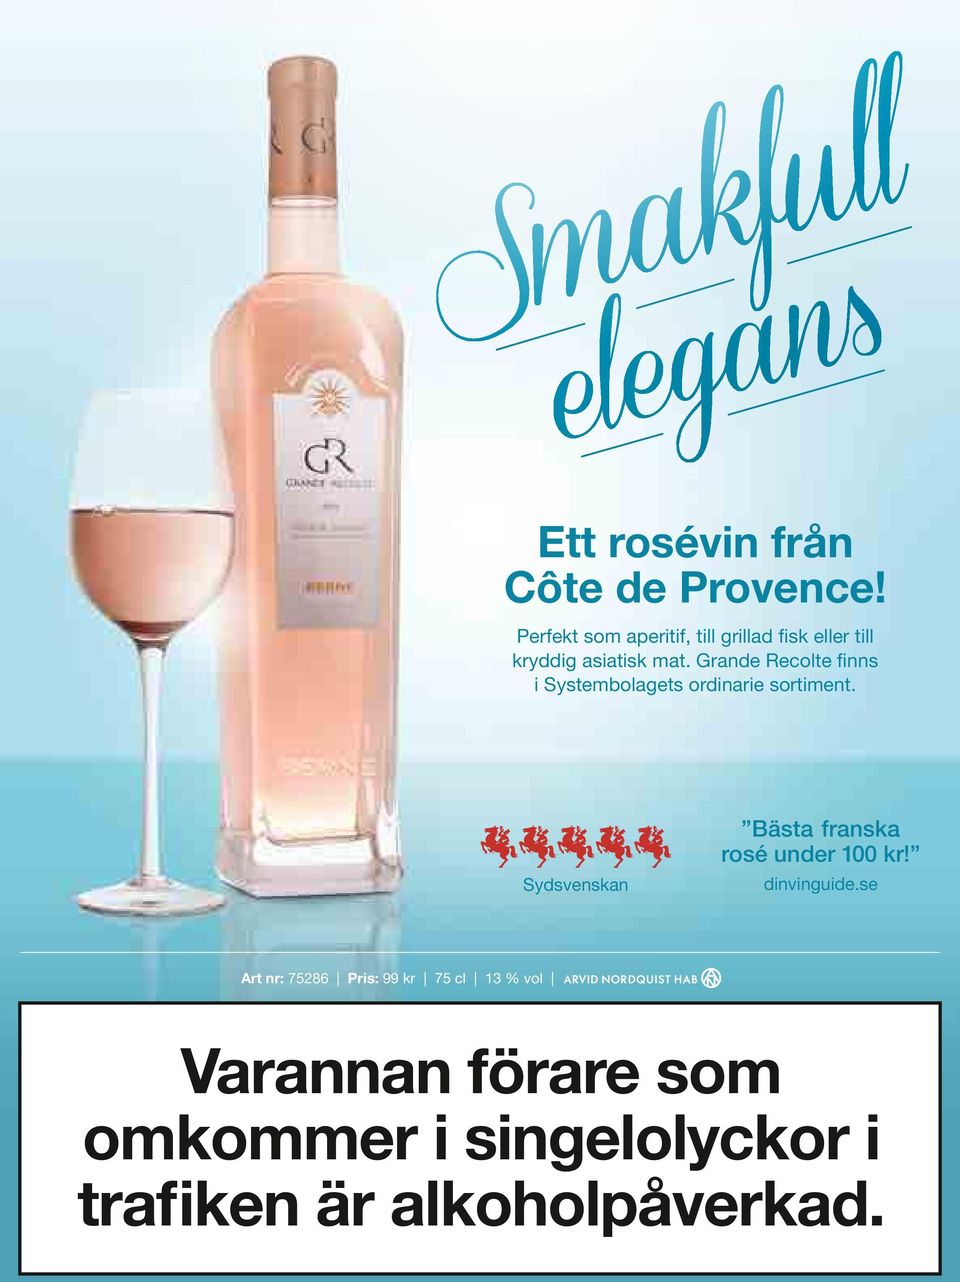 Grande Recolte finns i Systembolagets ordinarie sortiment.